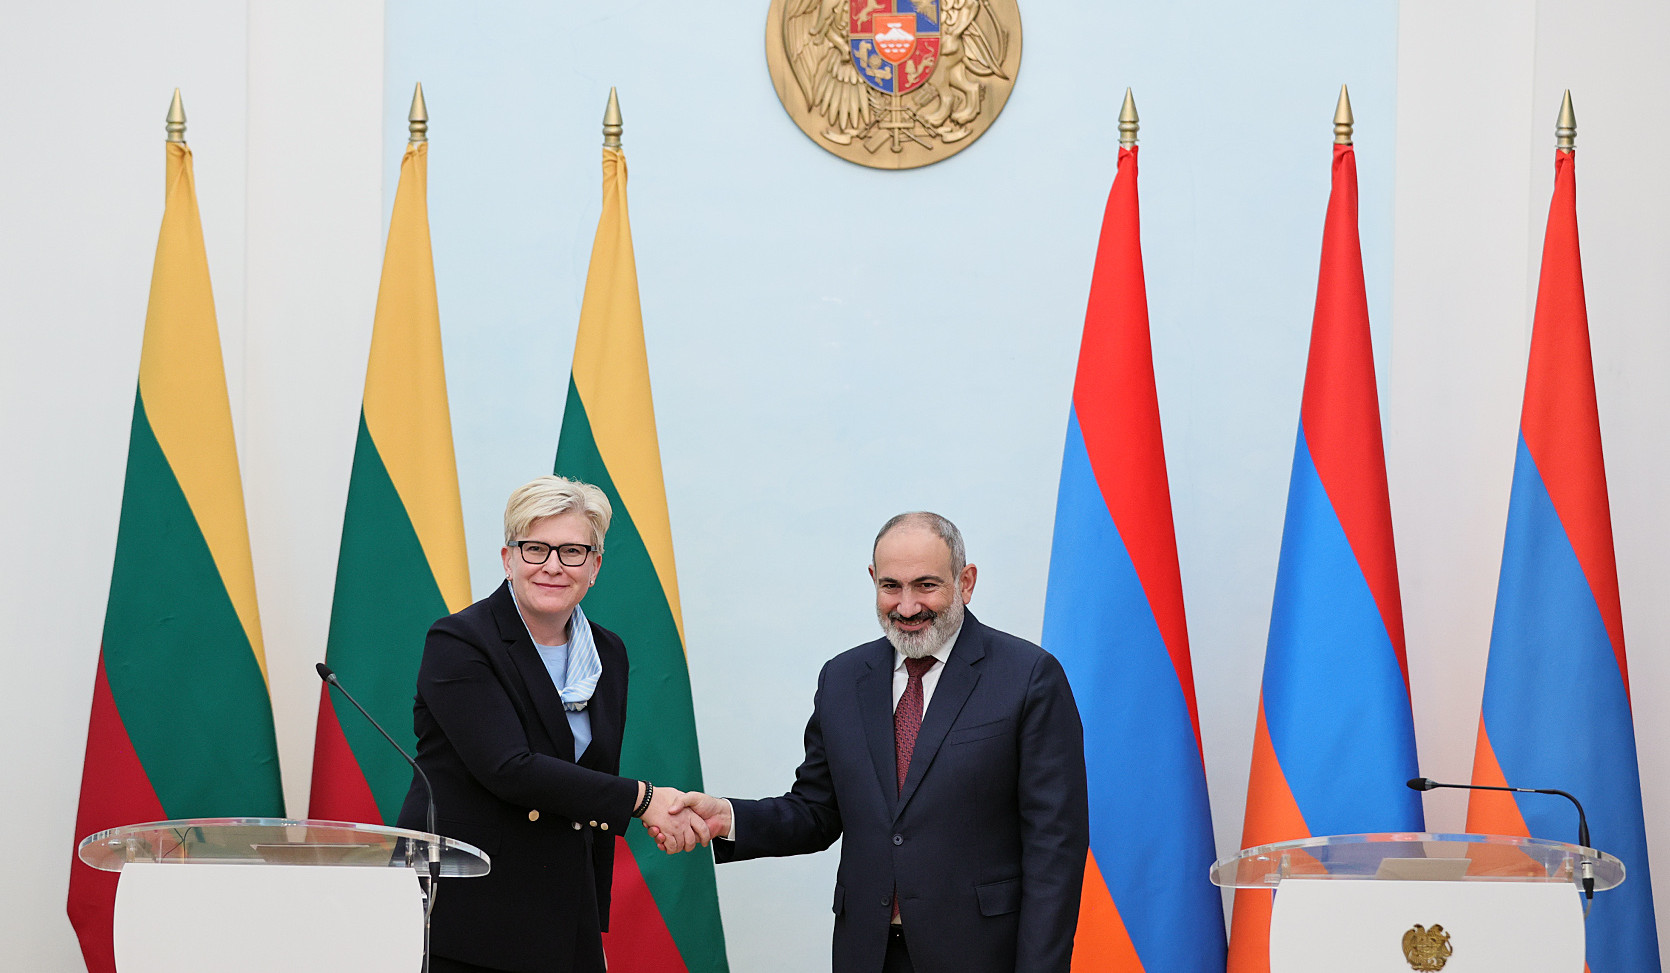 Prime Minister sends congratulatory message to the Prime Minister of Lithuania